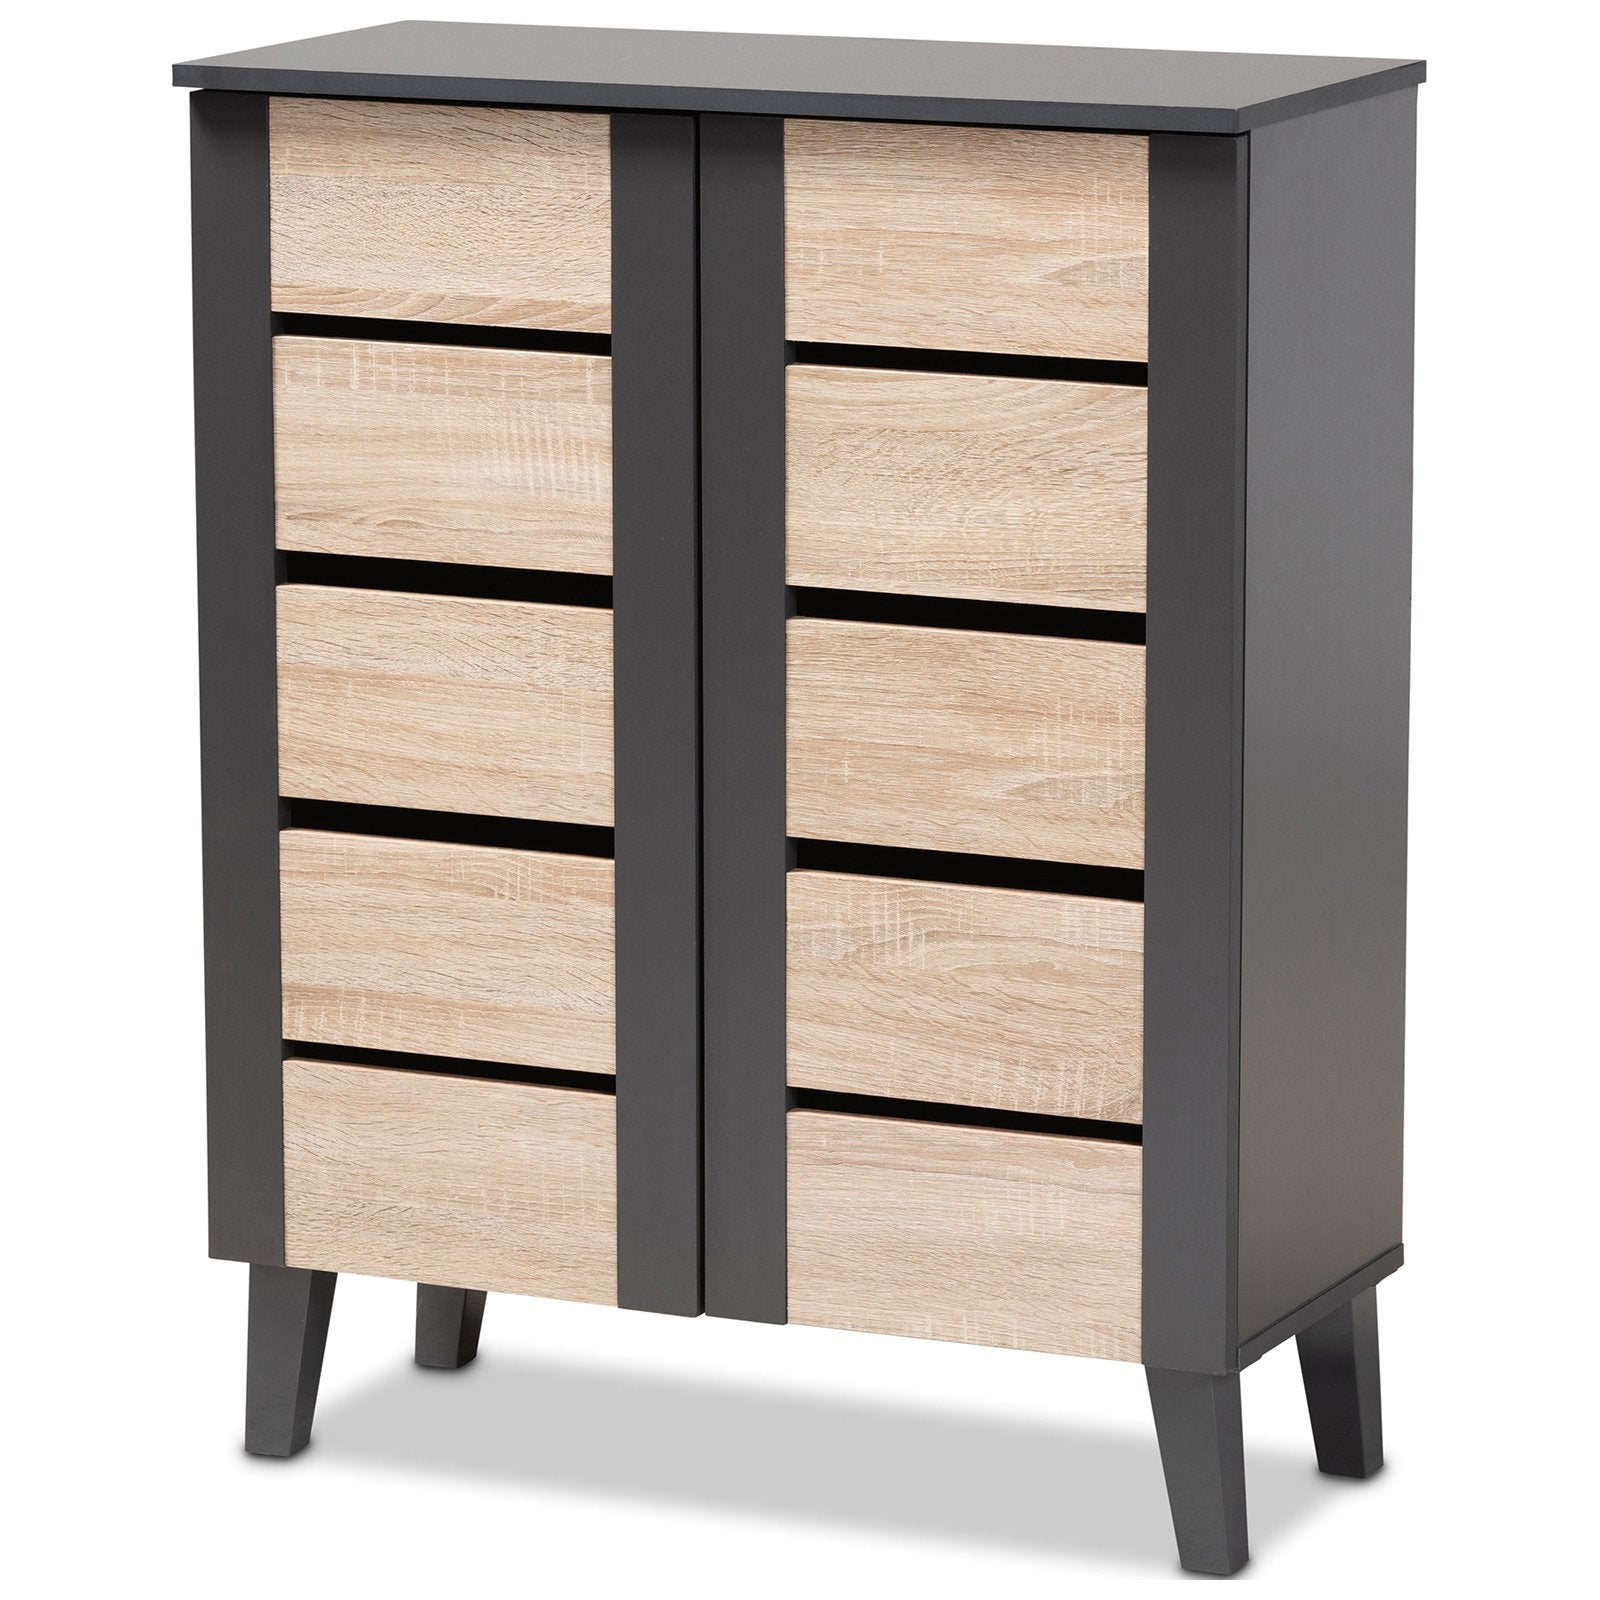 Melle Chests Cabinets Shoe Cabinet Engineer Wood Oak Gray